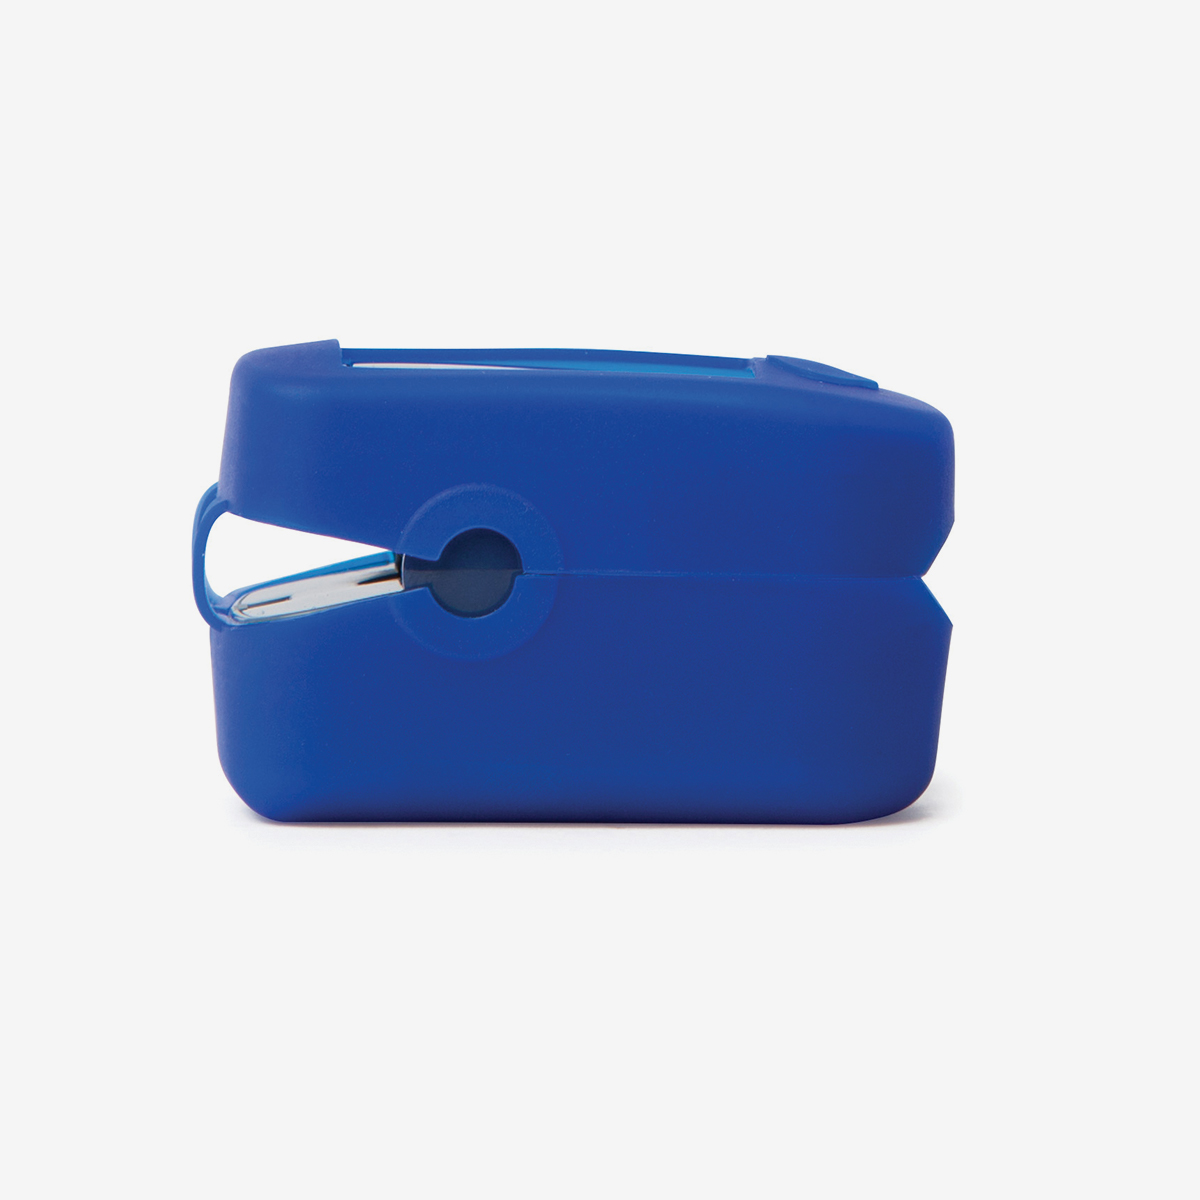 Side of blue MD300 C2 Pulse oximeter on white background